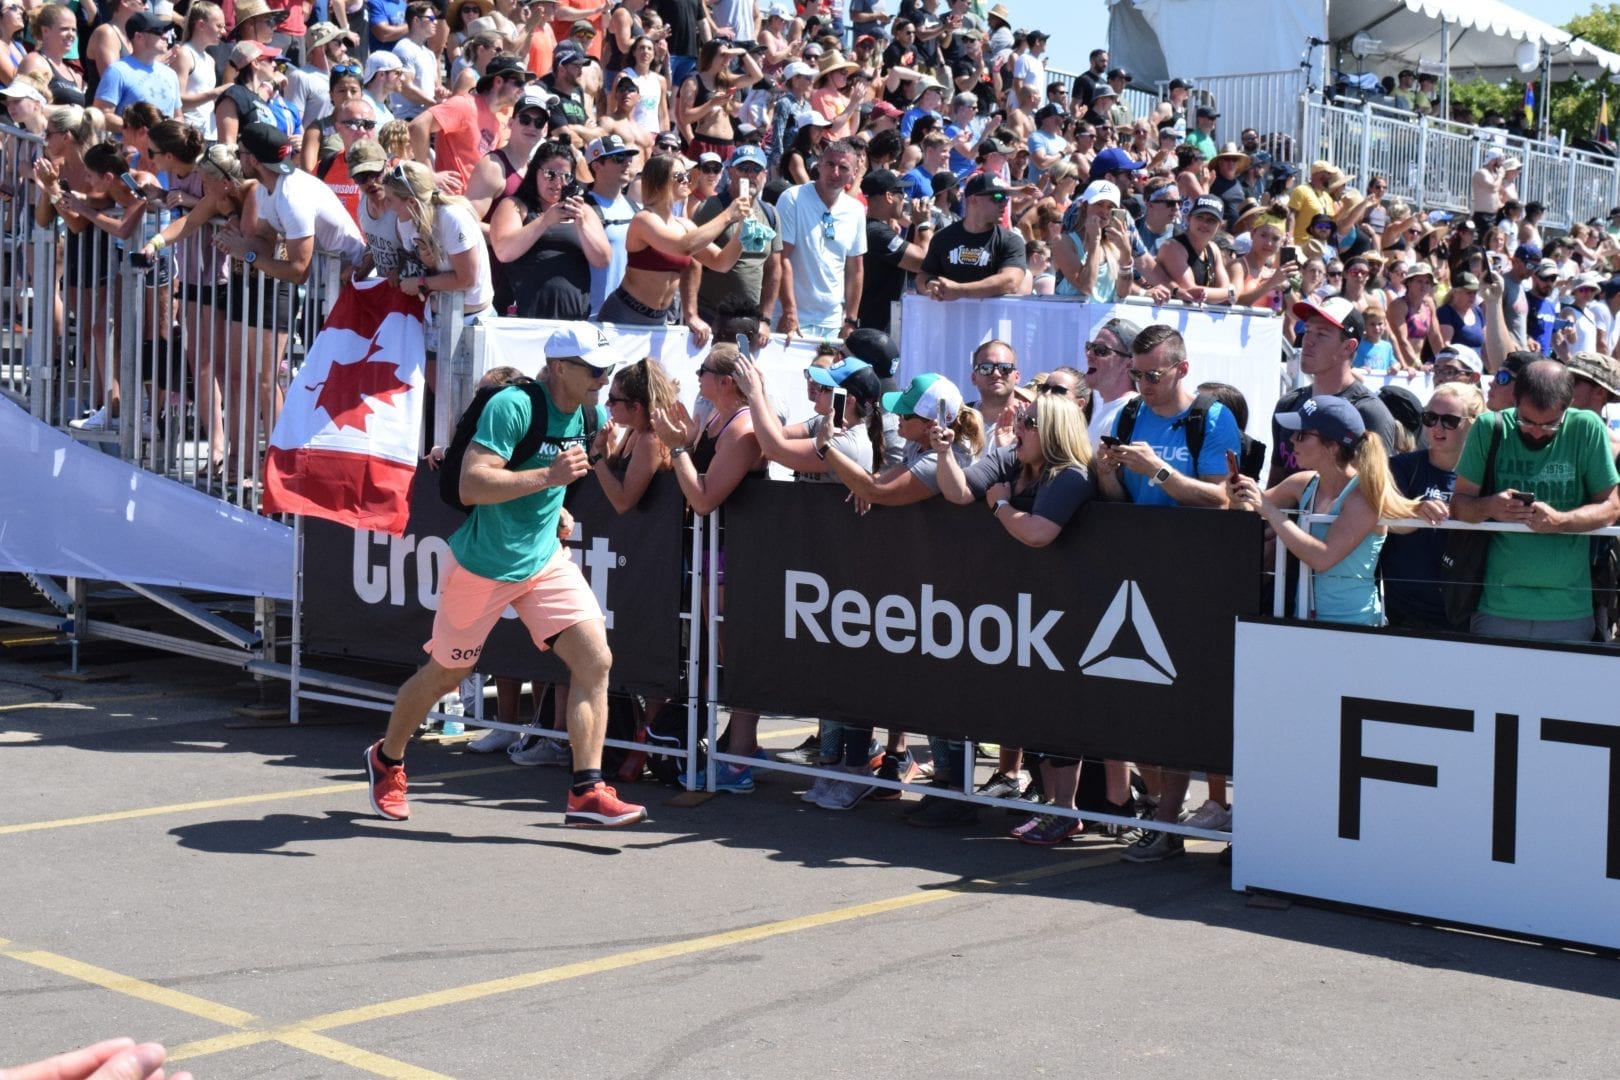 Brent Fikowski of Canada completes the Ruck Run event at the 2019 CrossFit Games